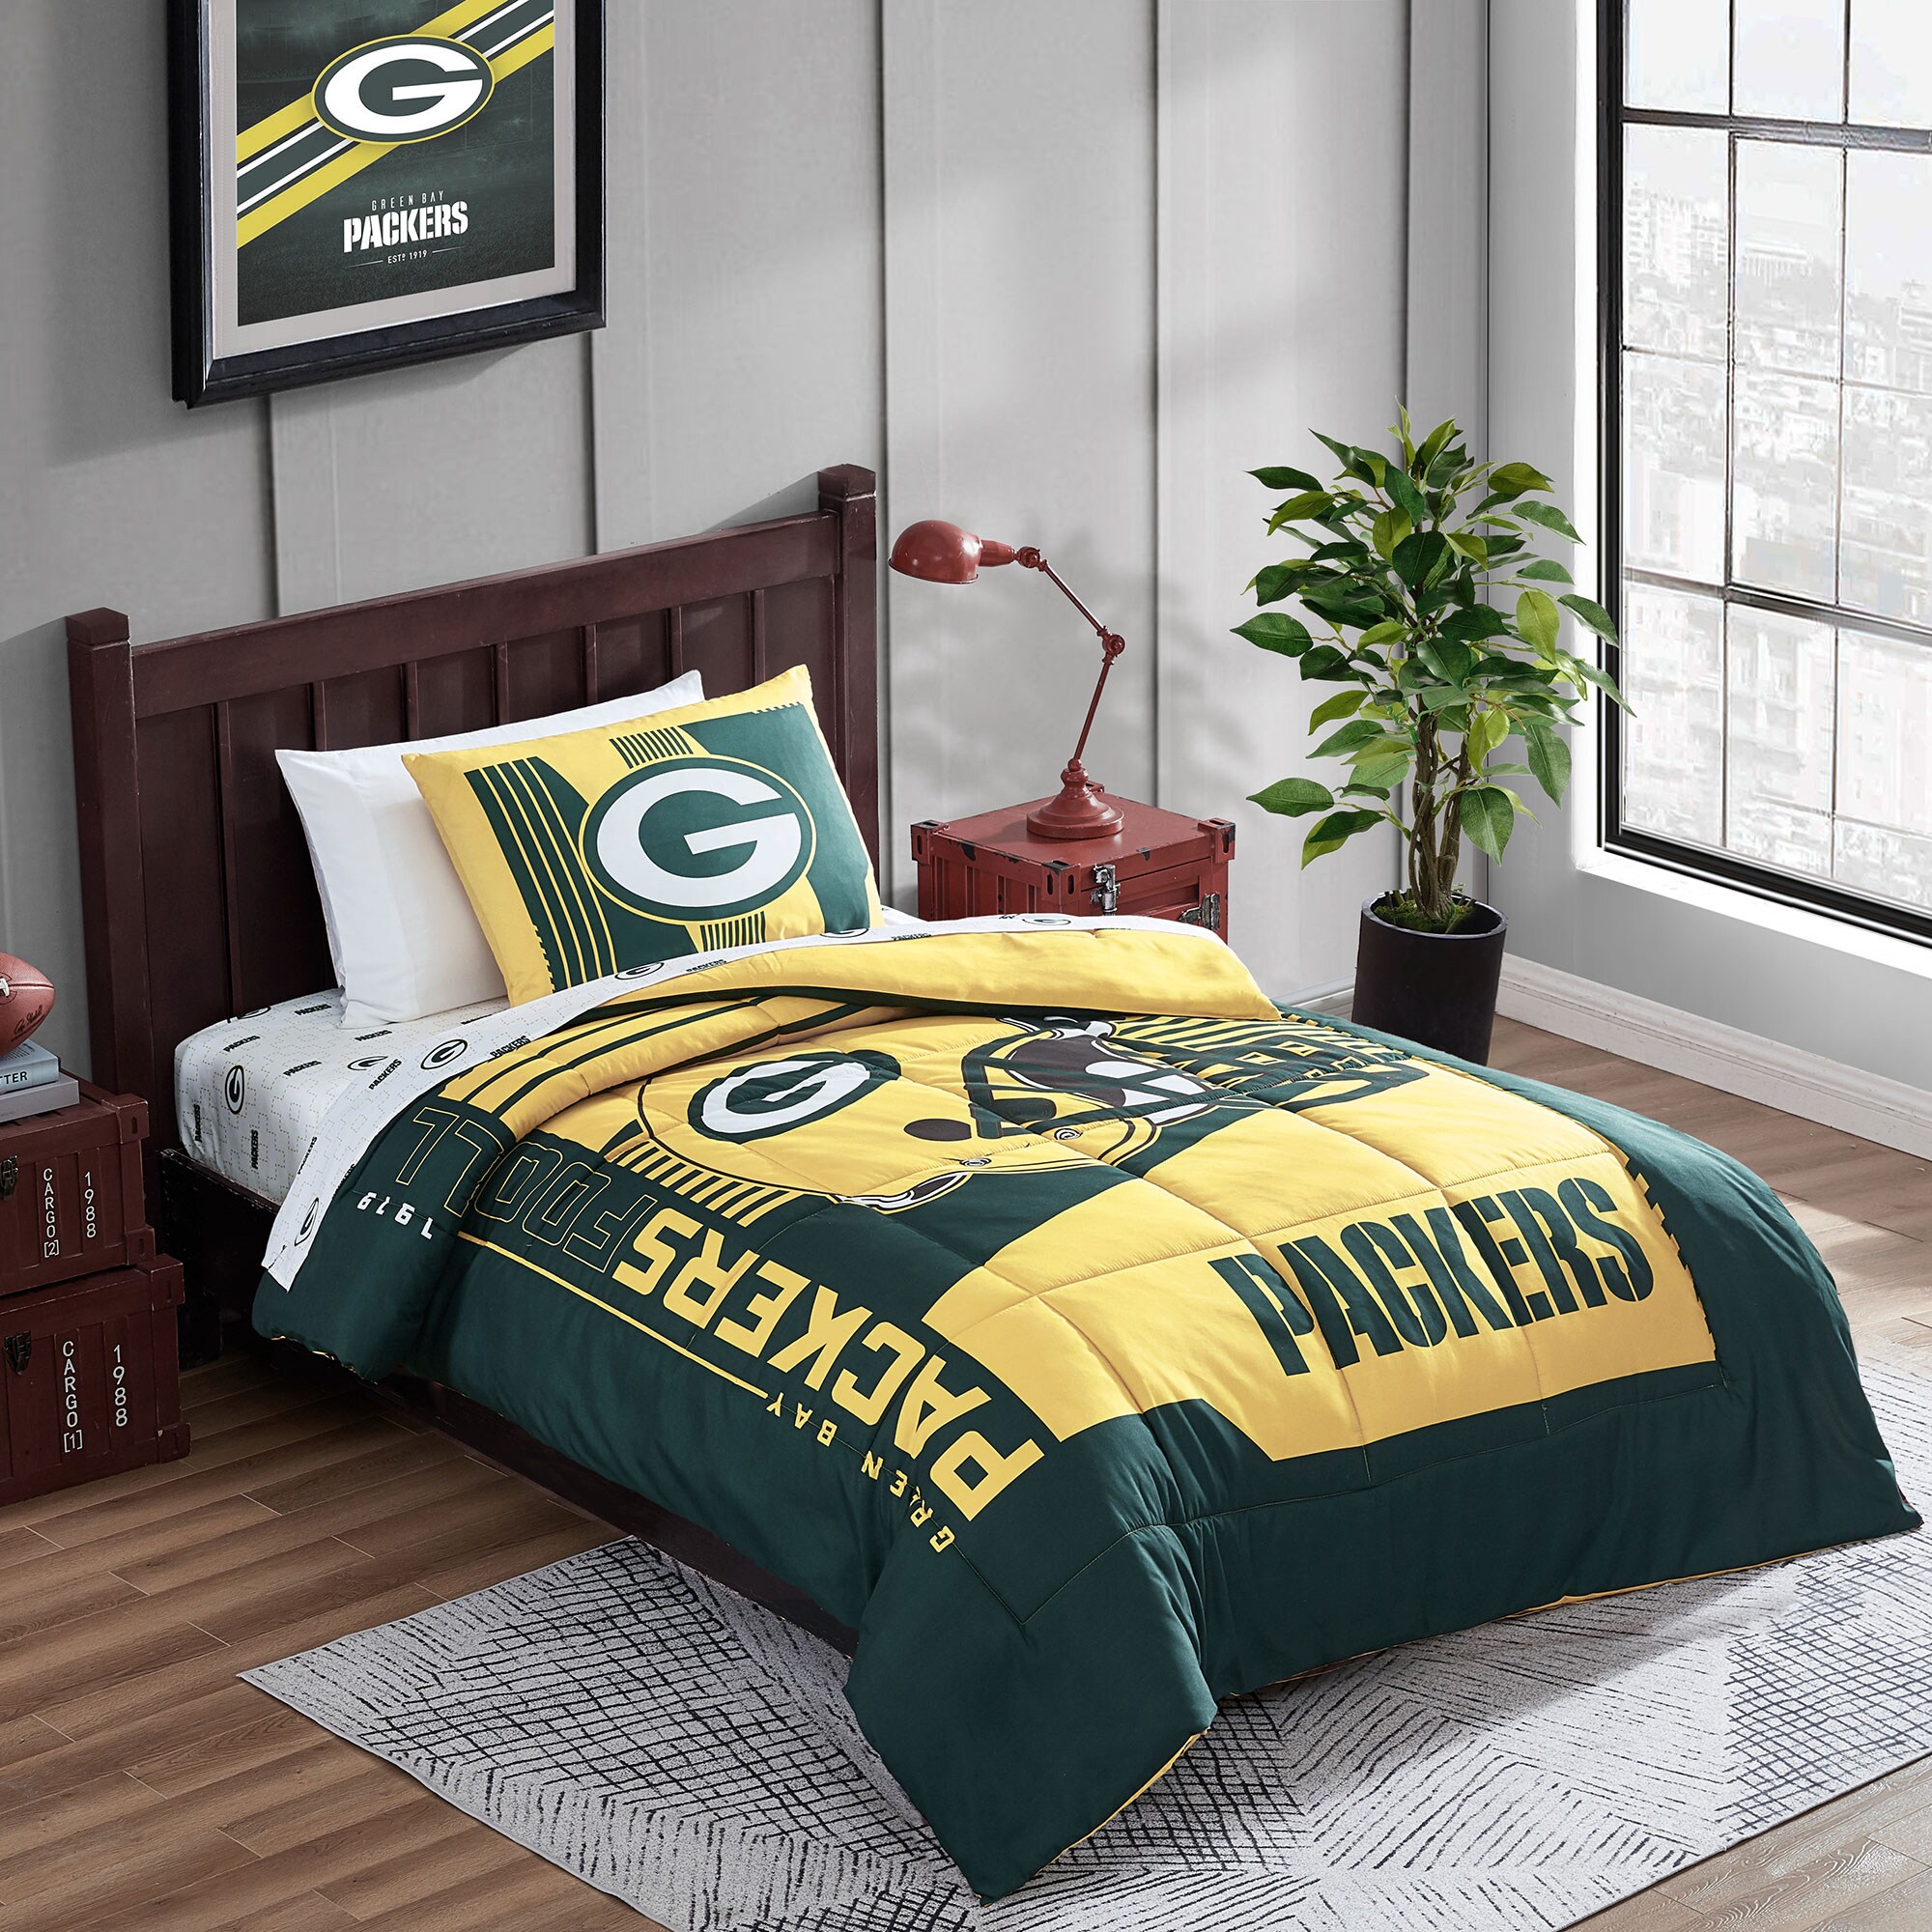 Officially Licensed NFL Sofa Cover - Green Bay Packers